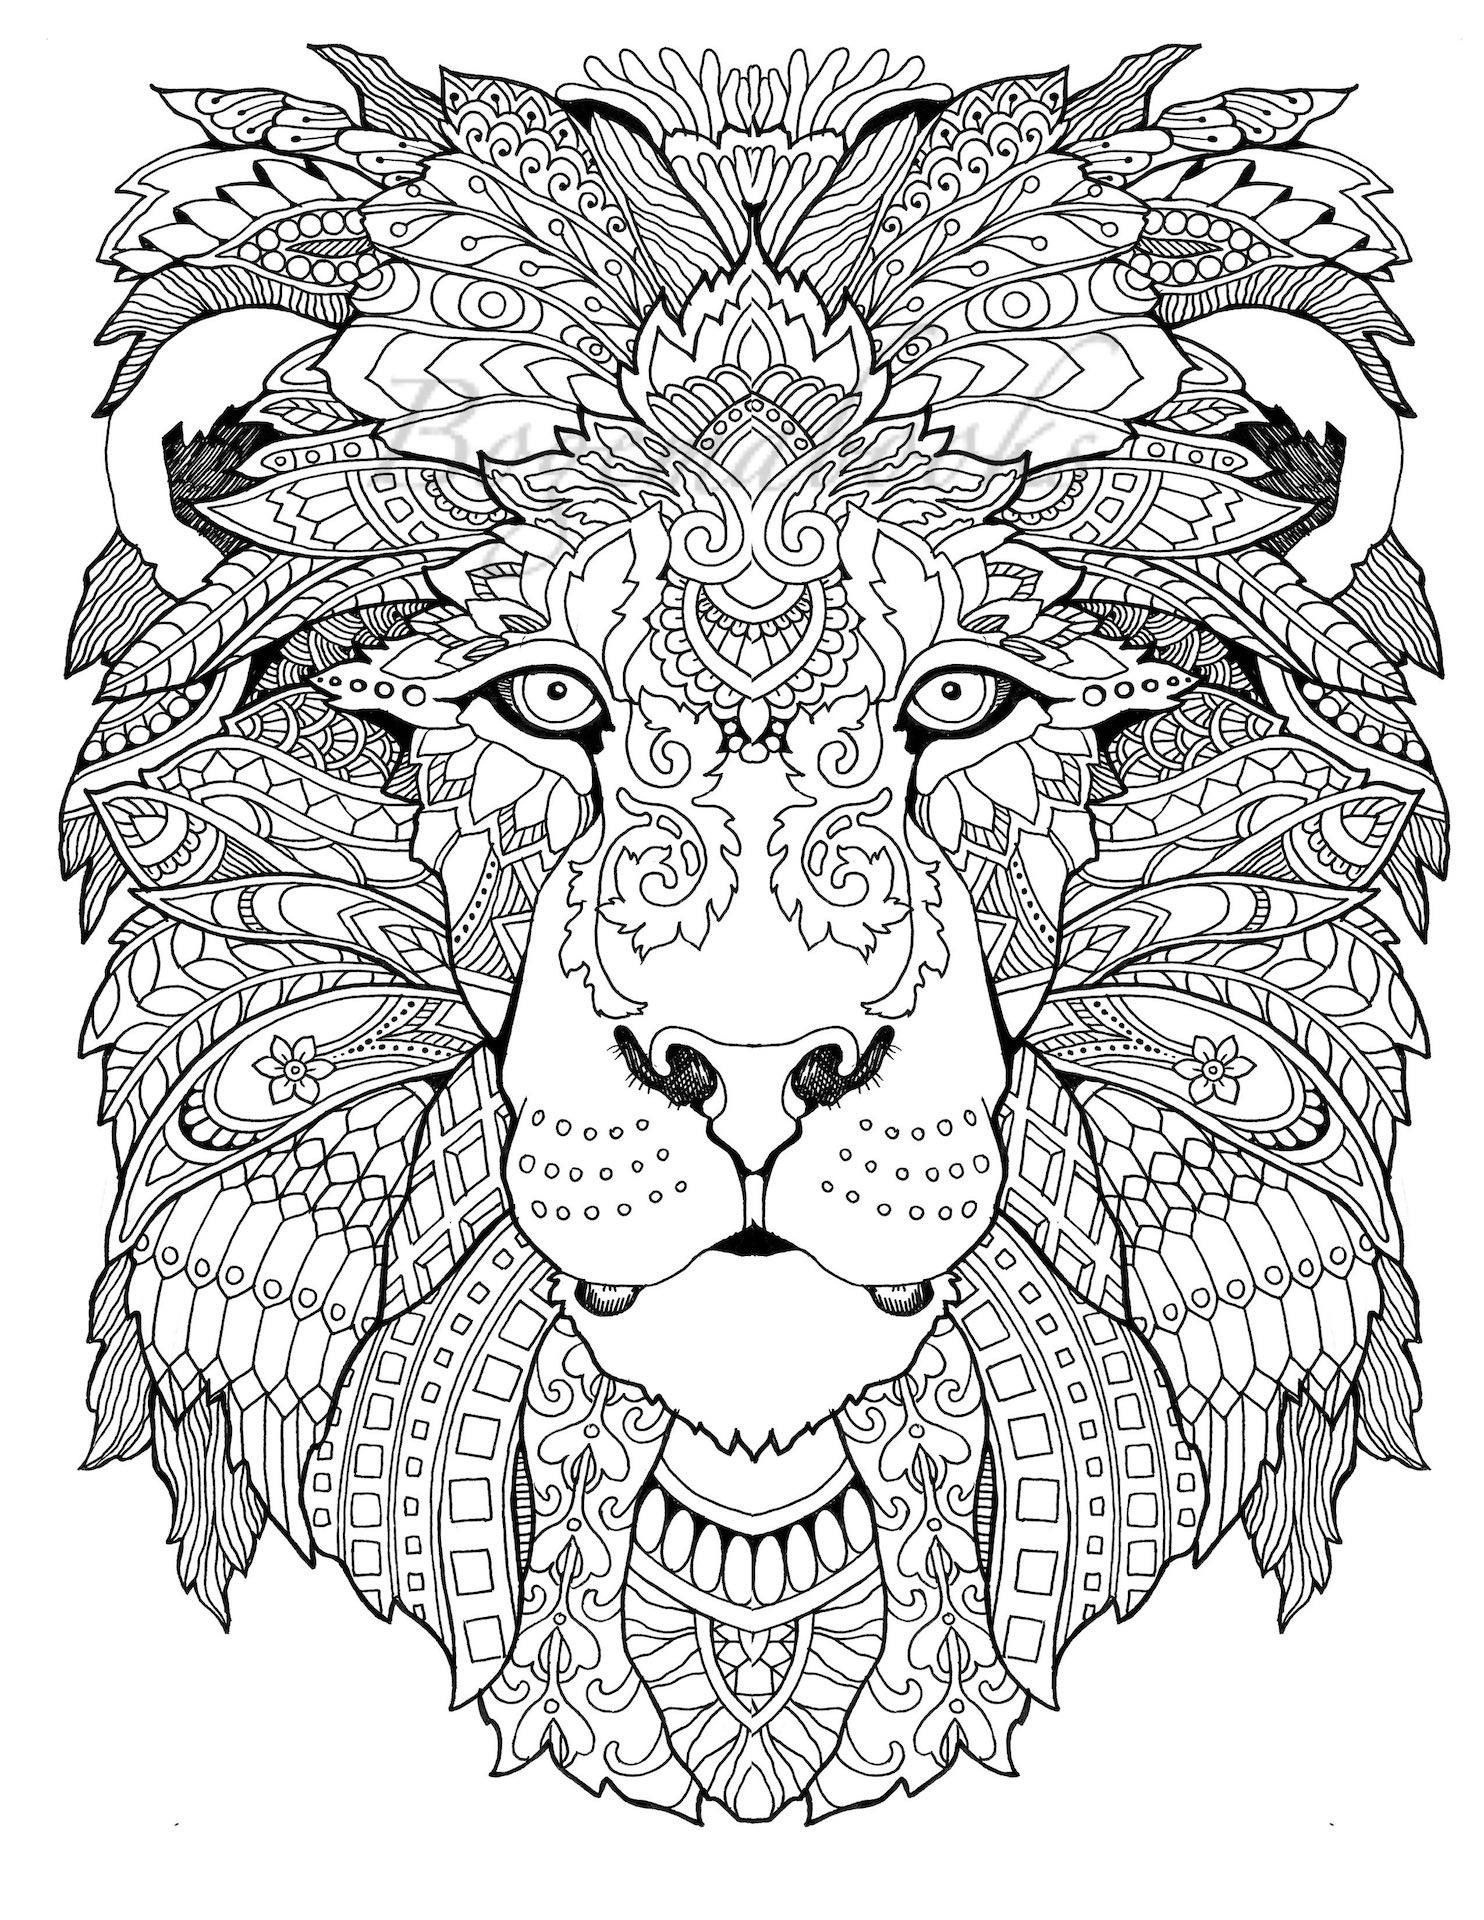 Free Coloring Books Pdf Luxury Luxury Awesome Animals Adult Coloring Book Coloring Pages Pdf